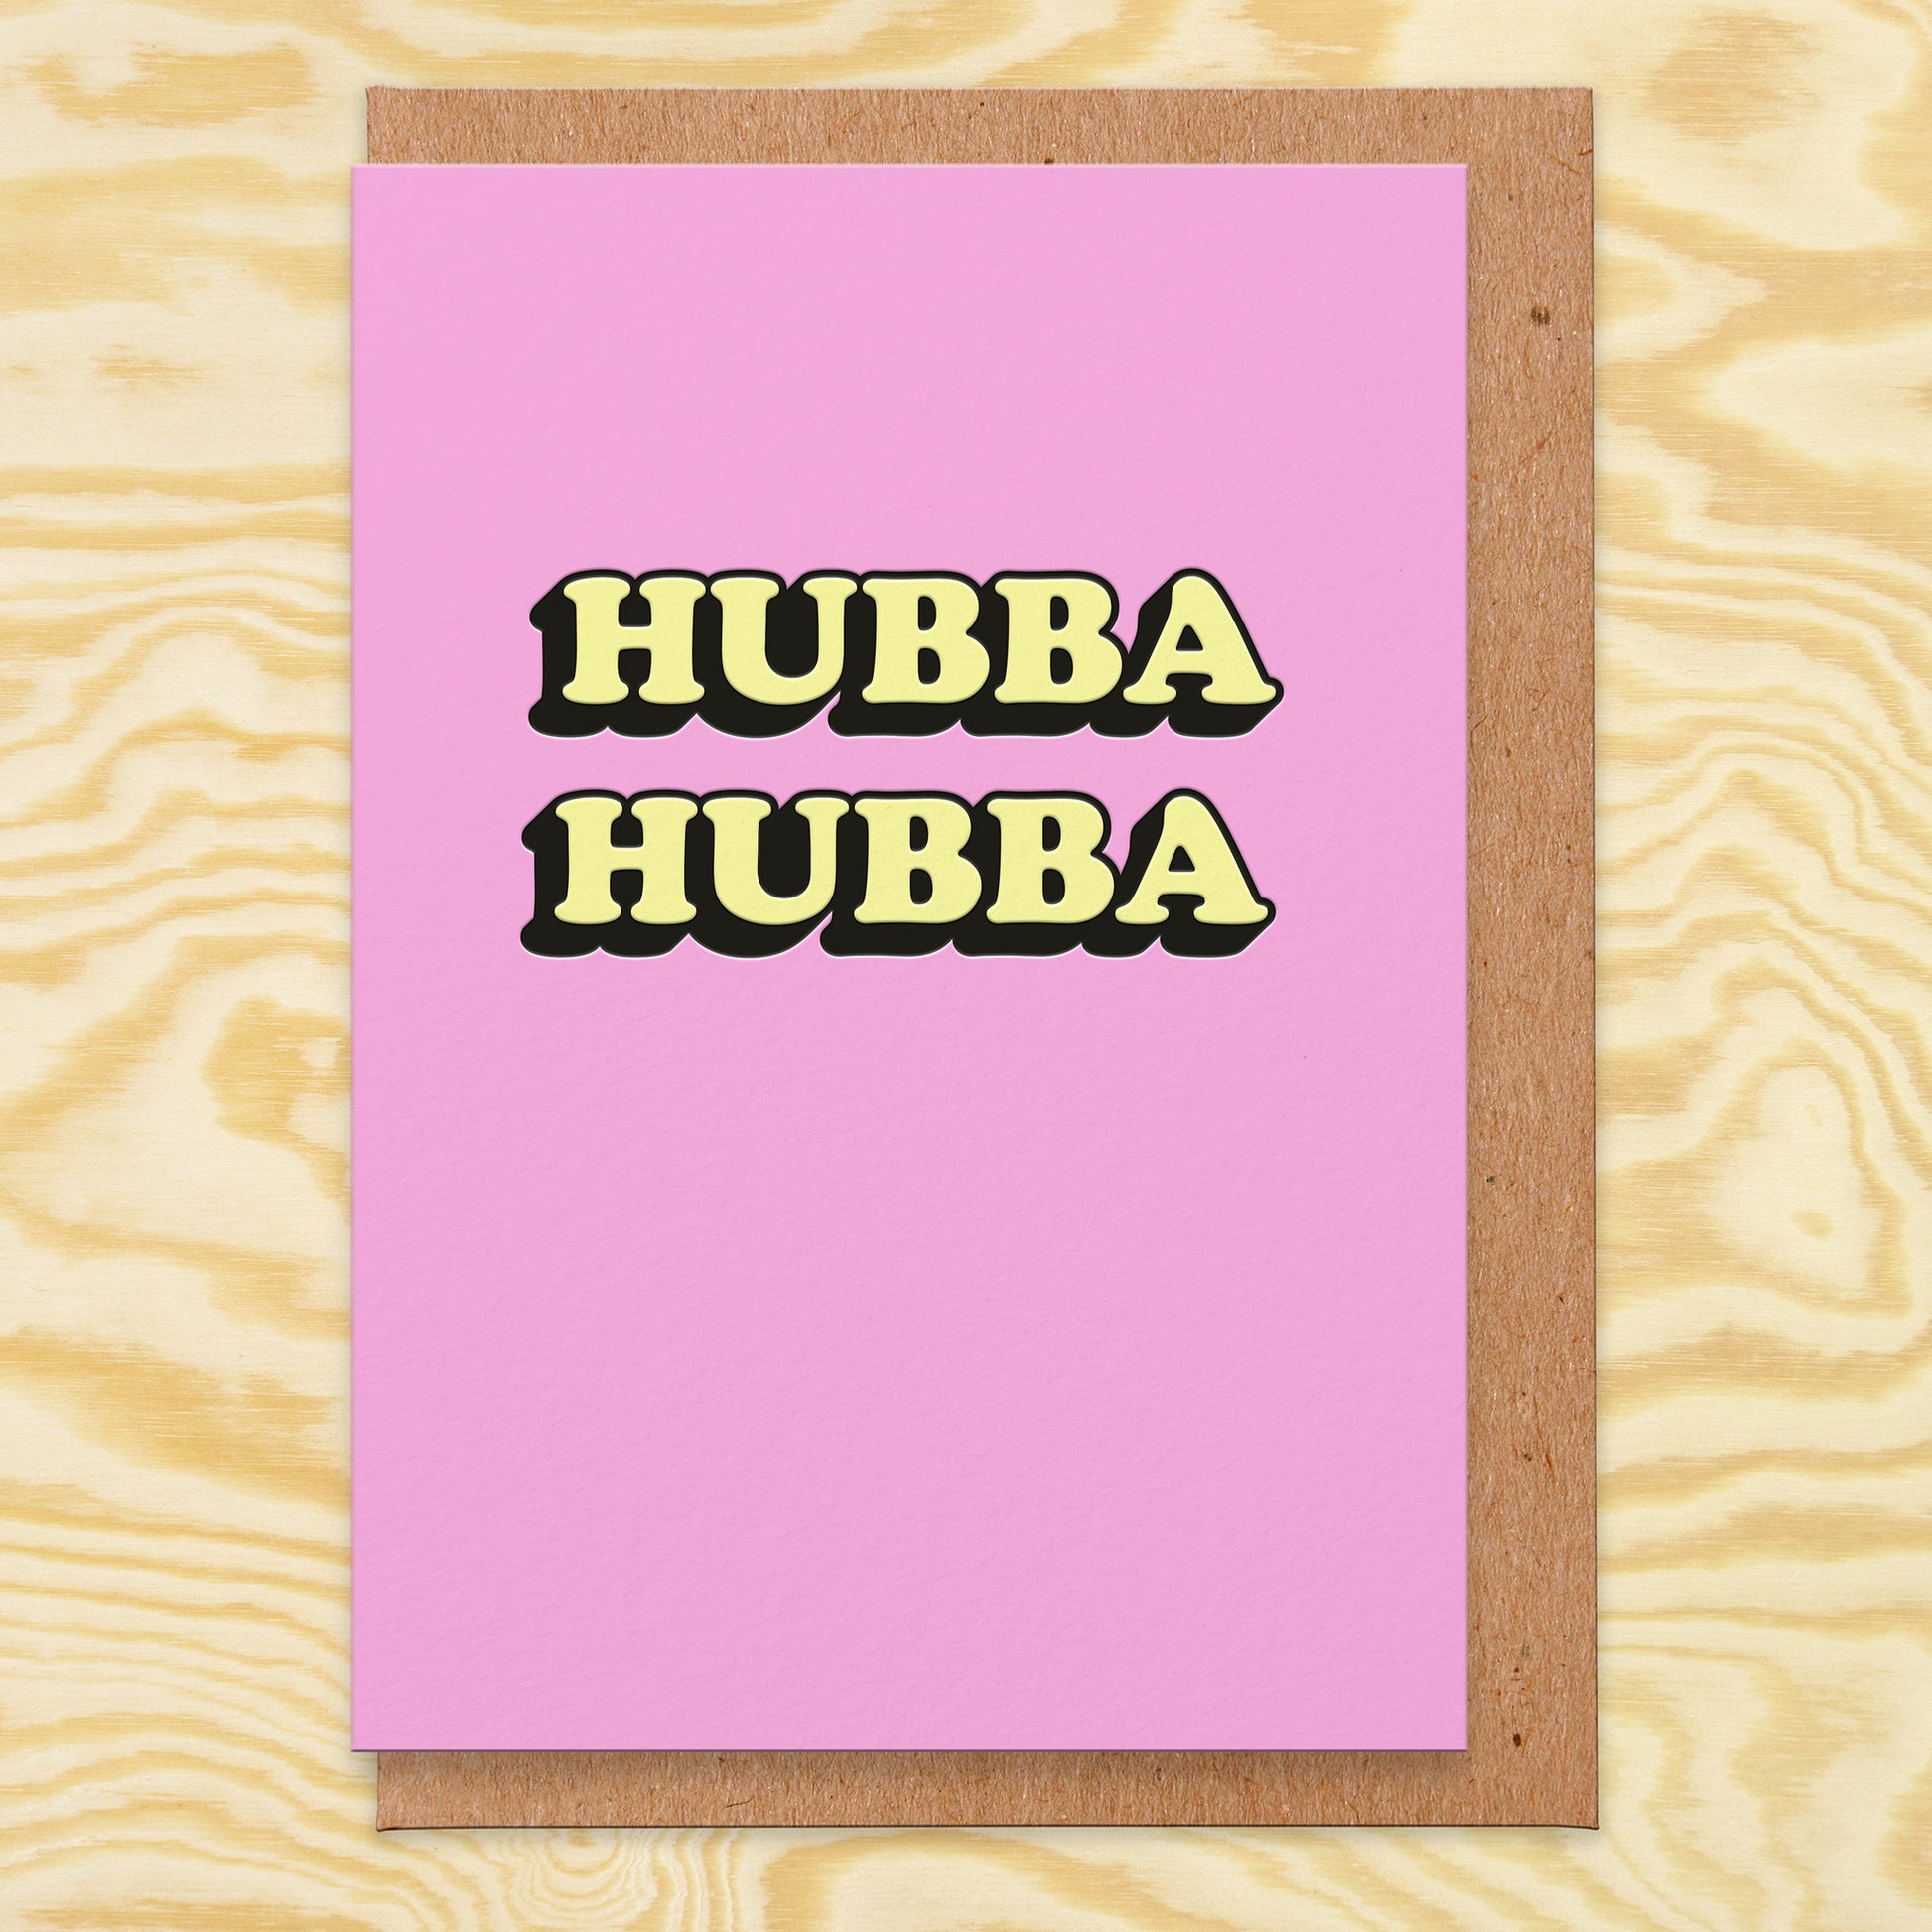 Love card that has the words hub hub in yellow on a bright pink background.